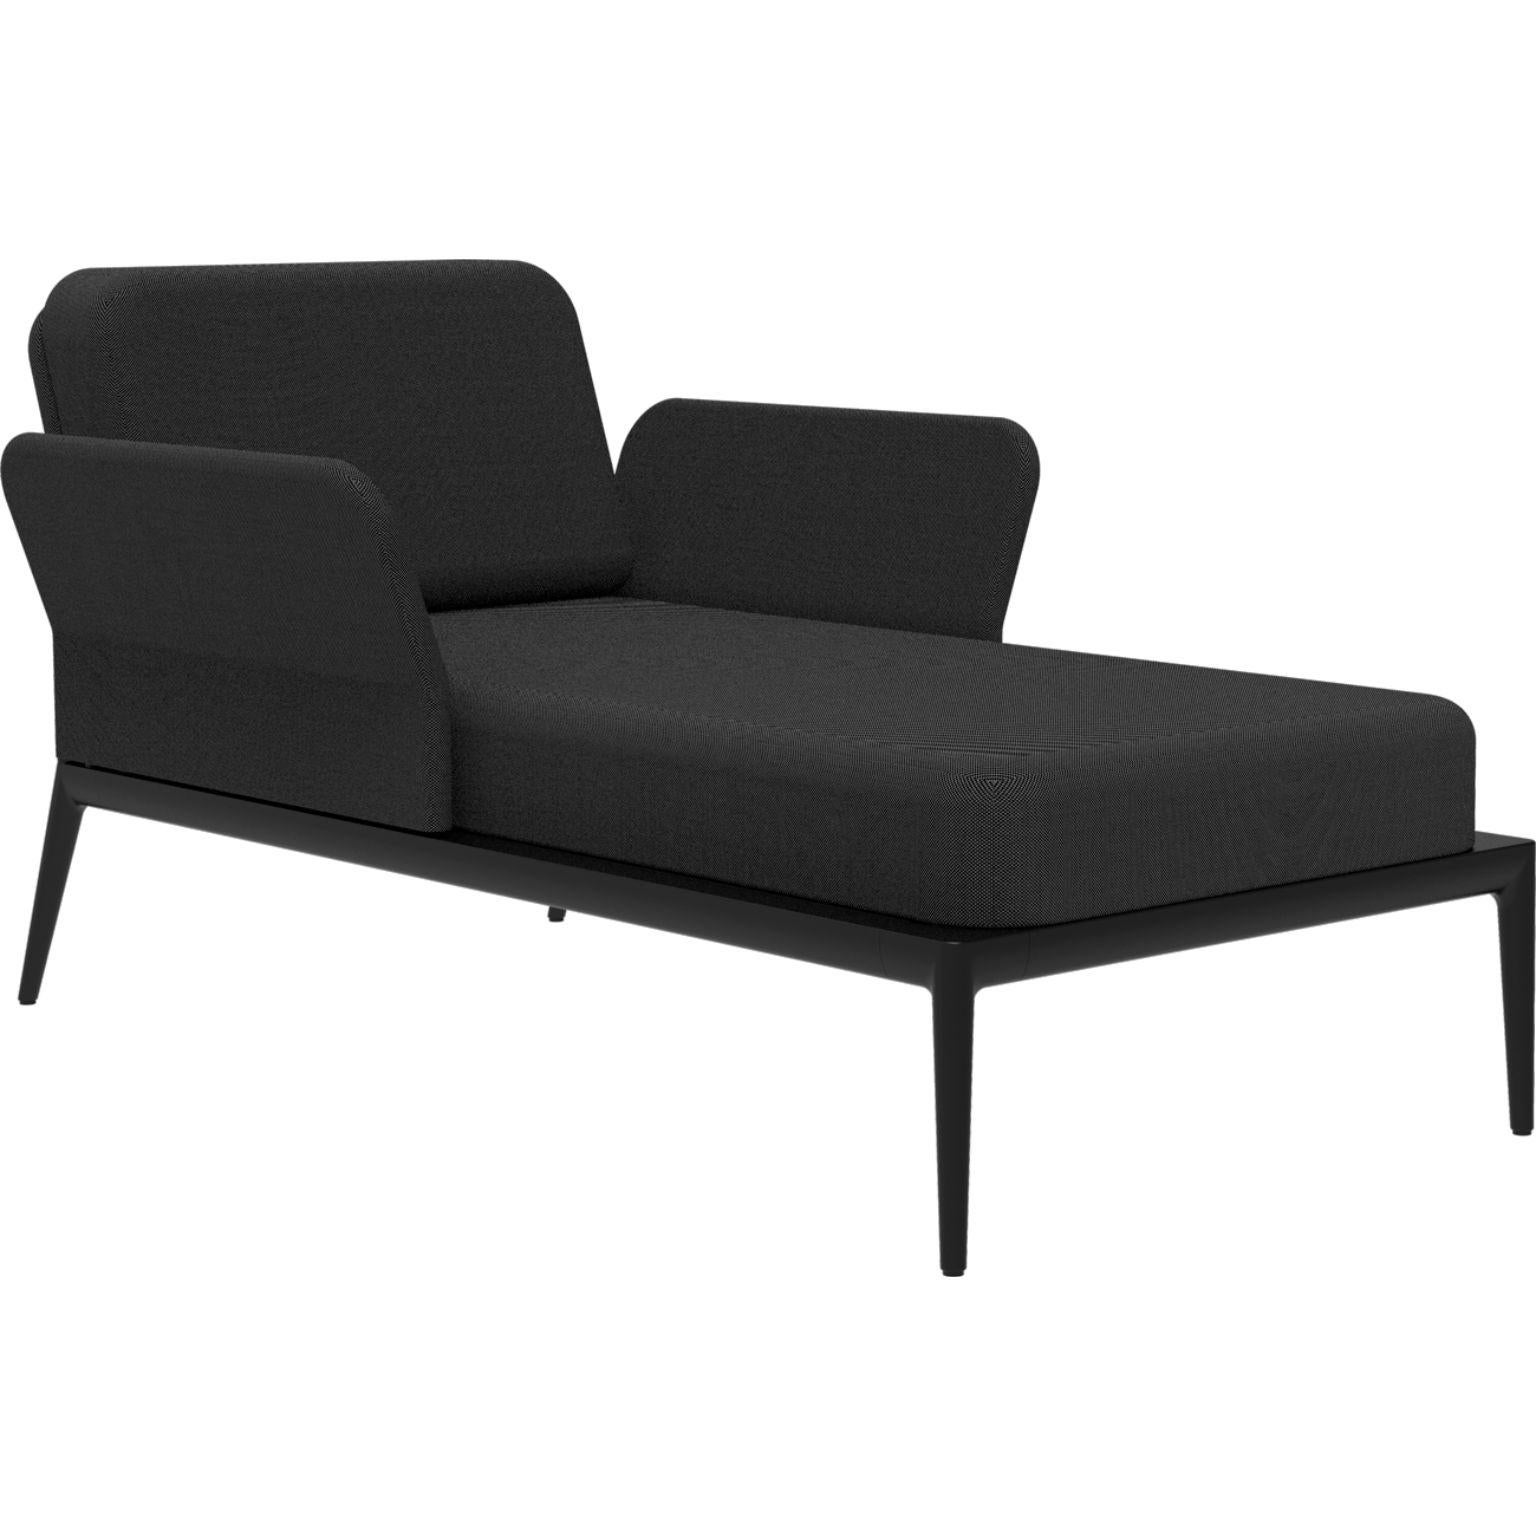 Cover black divan by MOWEE.
Dimensions: D91 x W155 x H81 cm (seat height 42 cm).
Material: aluminum and upholstery.
Weight: 30 kg.
Also available in different colors and finishes.

An unmistakable collection for its beauty and robustness. A